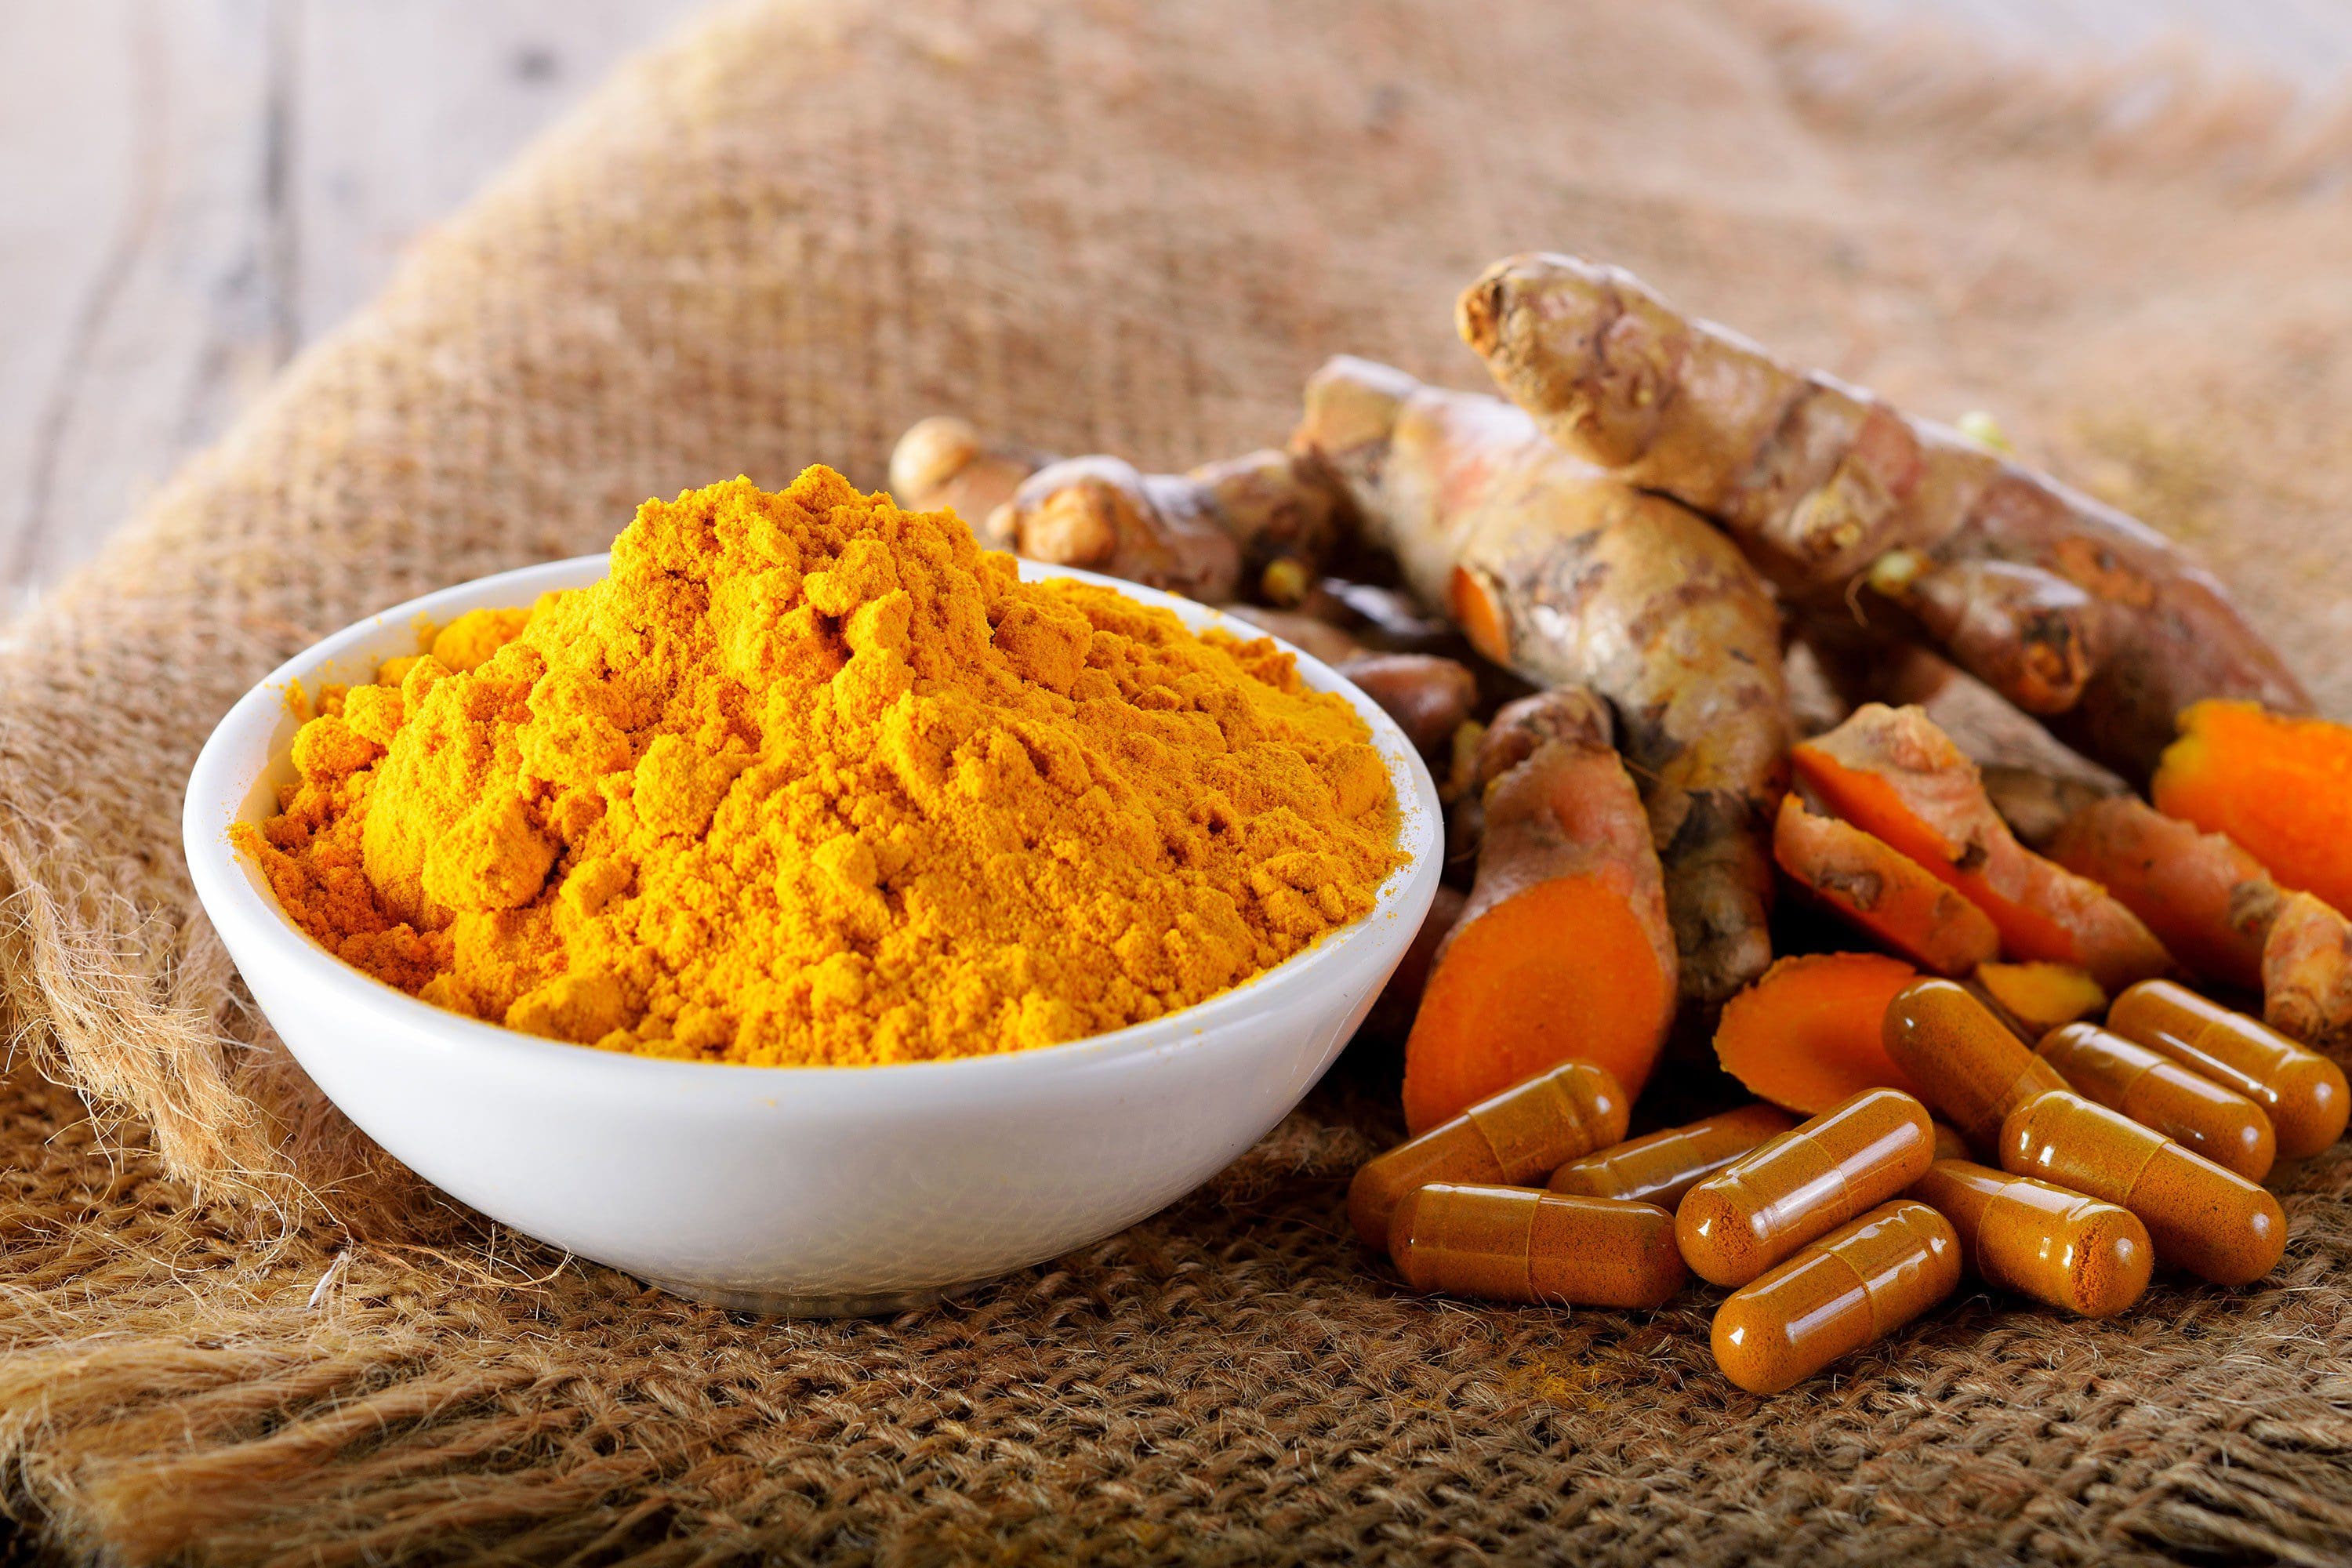 Functional Neurology: Health Benefits and Risks of Turmeric | El Paso, TX Chiropractor